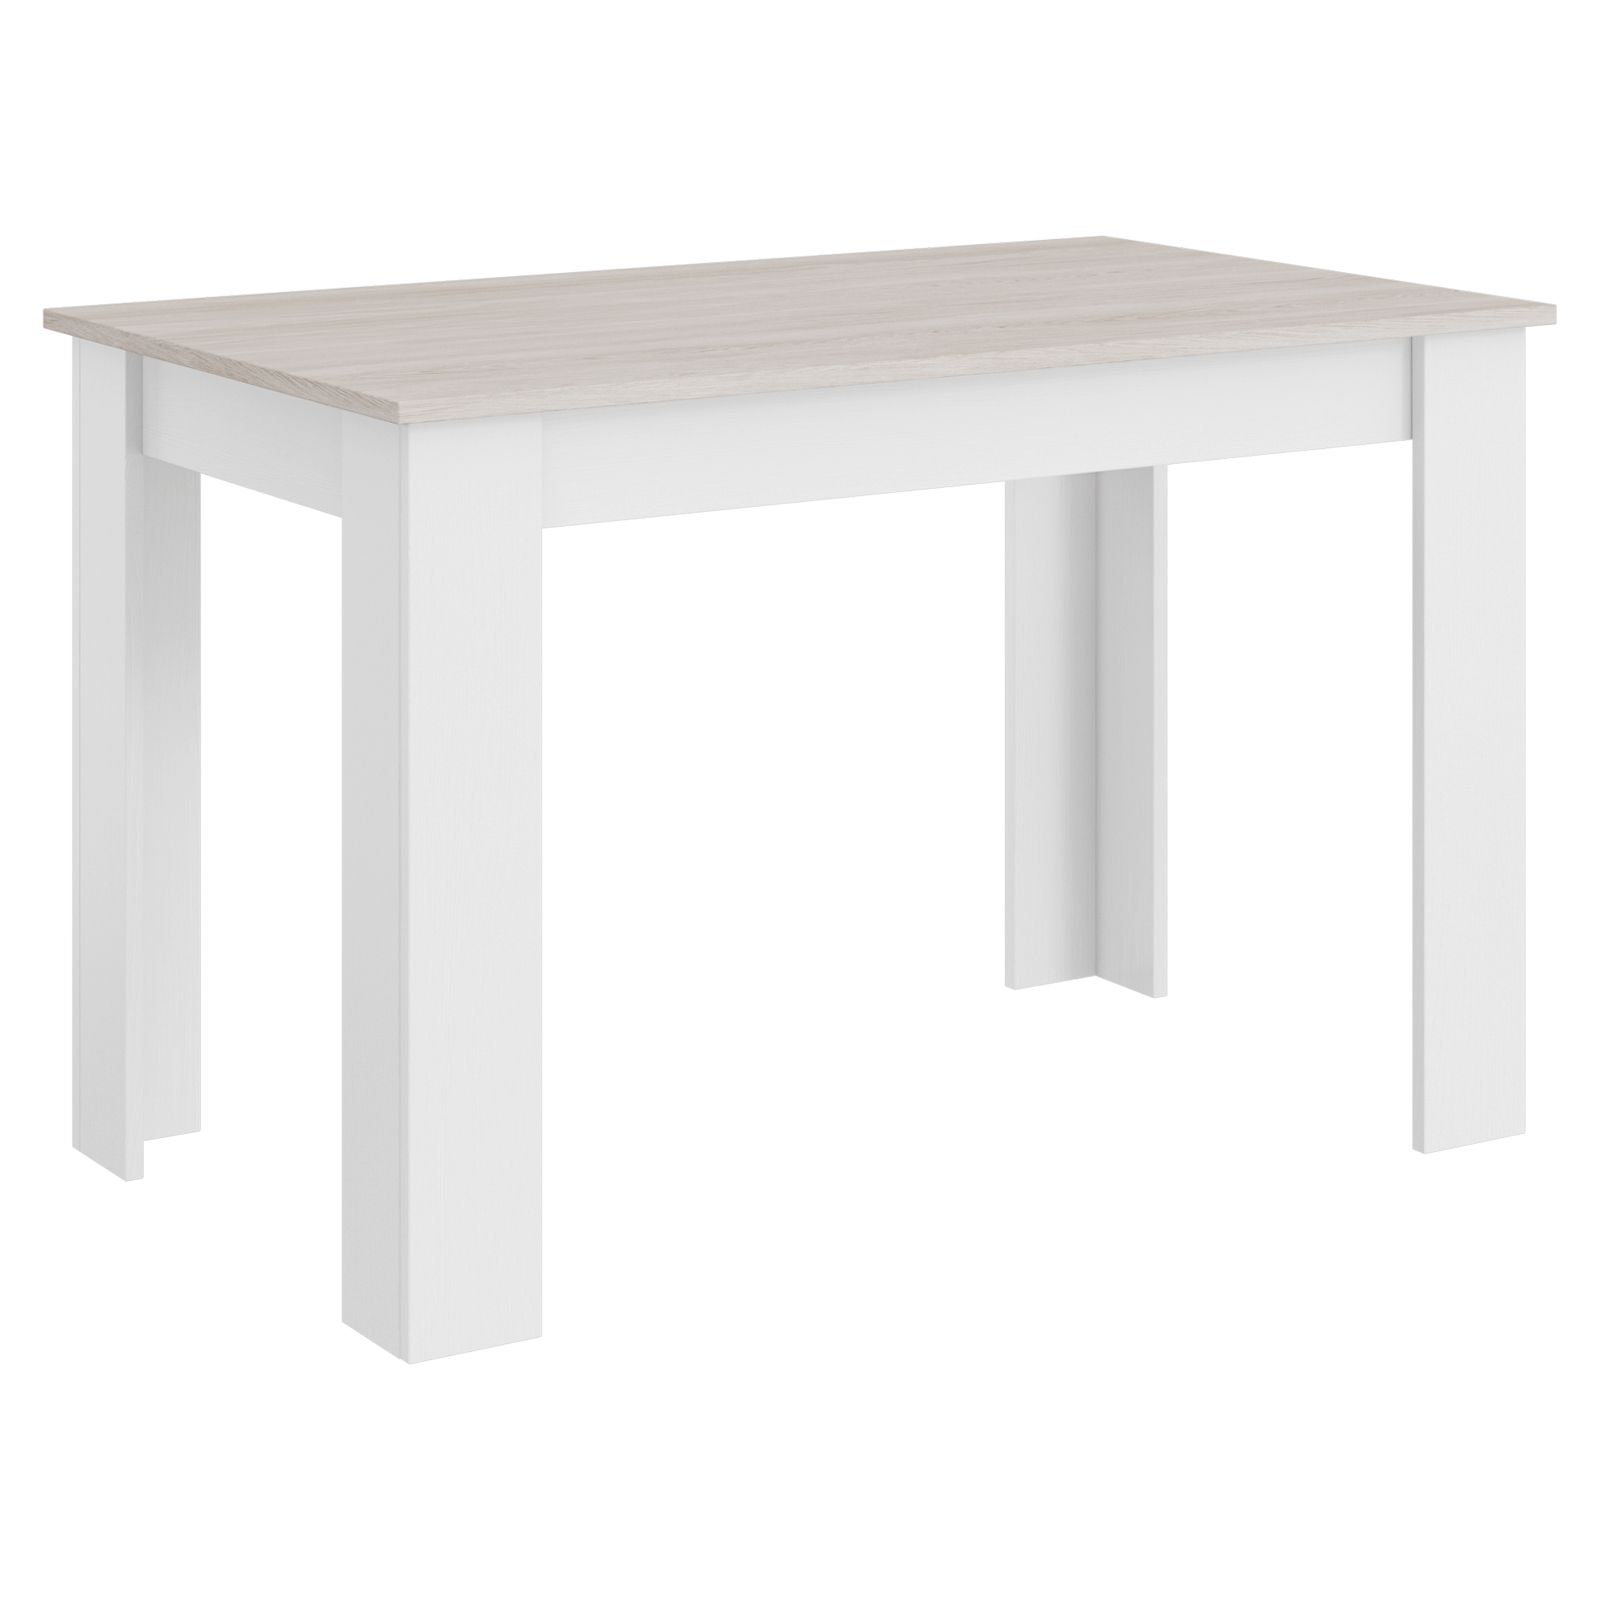 47 Inches Dining Table Kitchen Table for Small Spaces